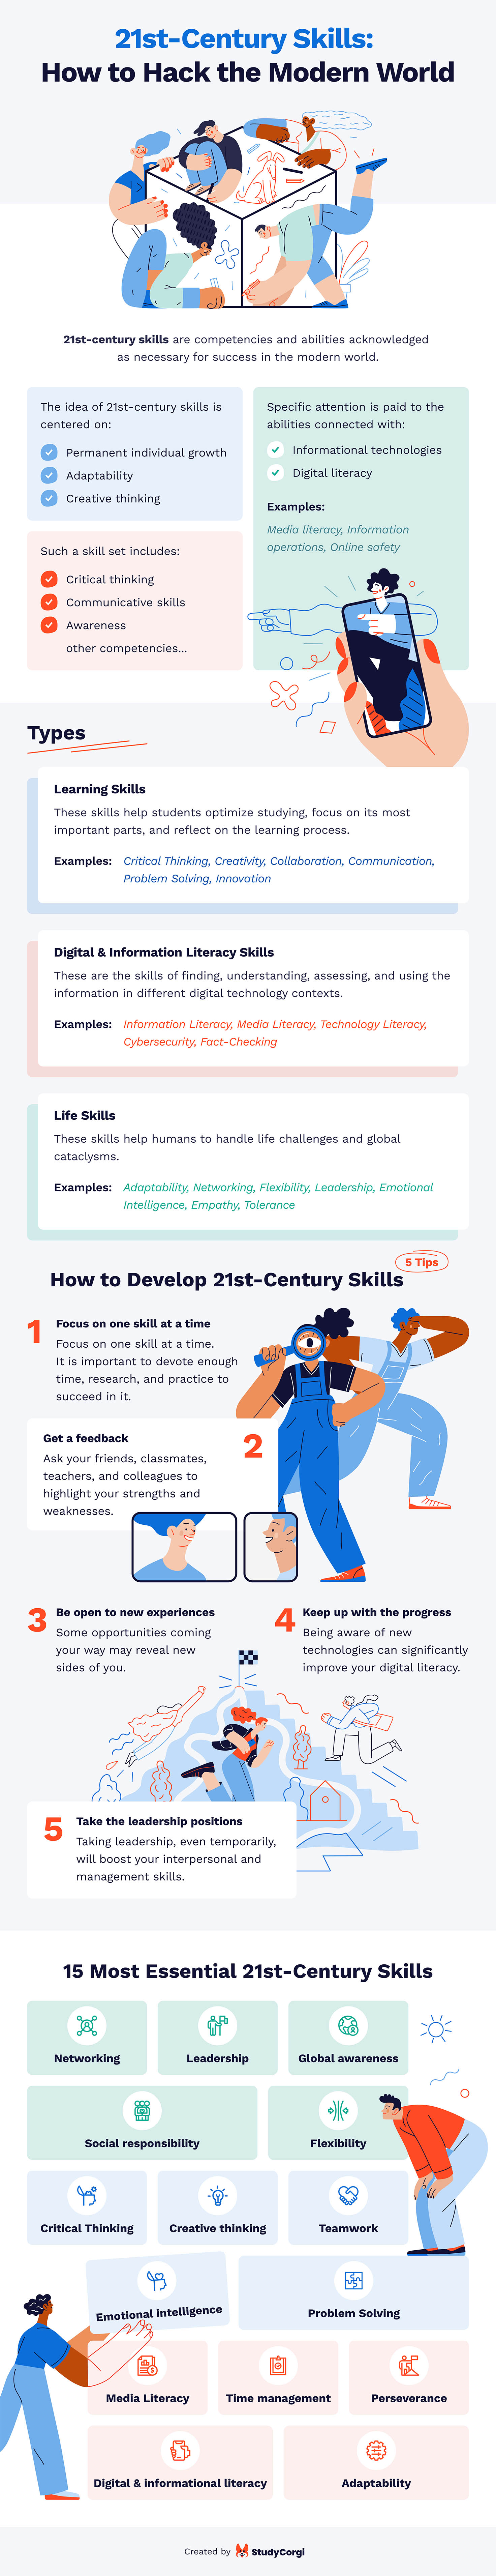 21st-Century Skills That Every Learner Needs